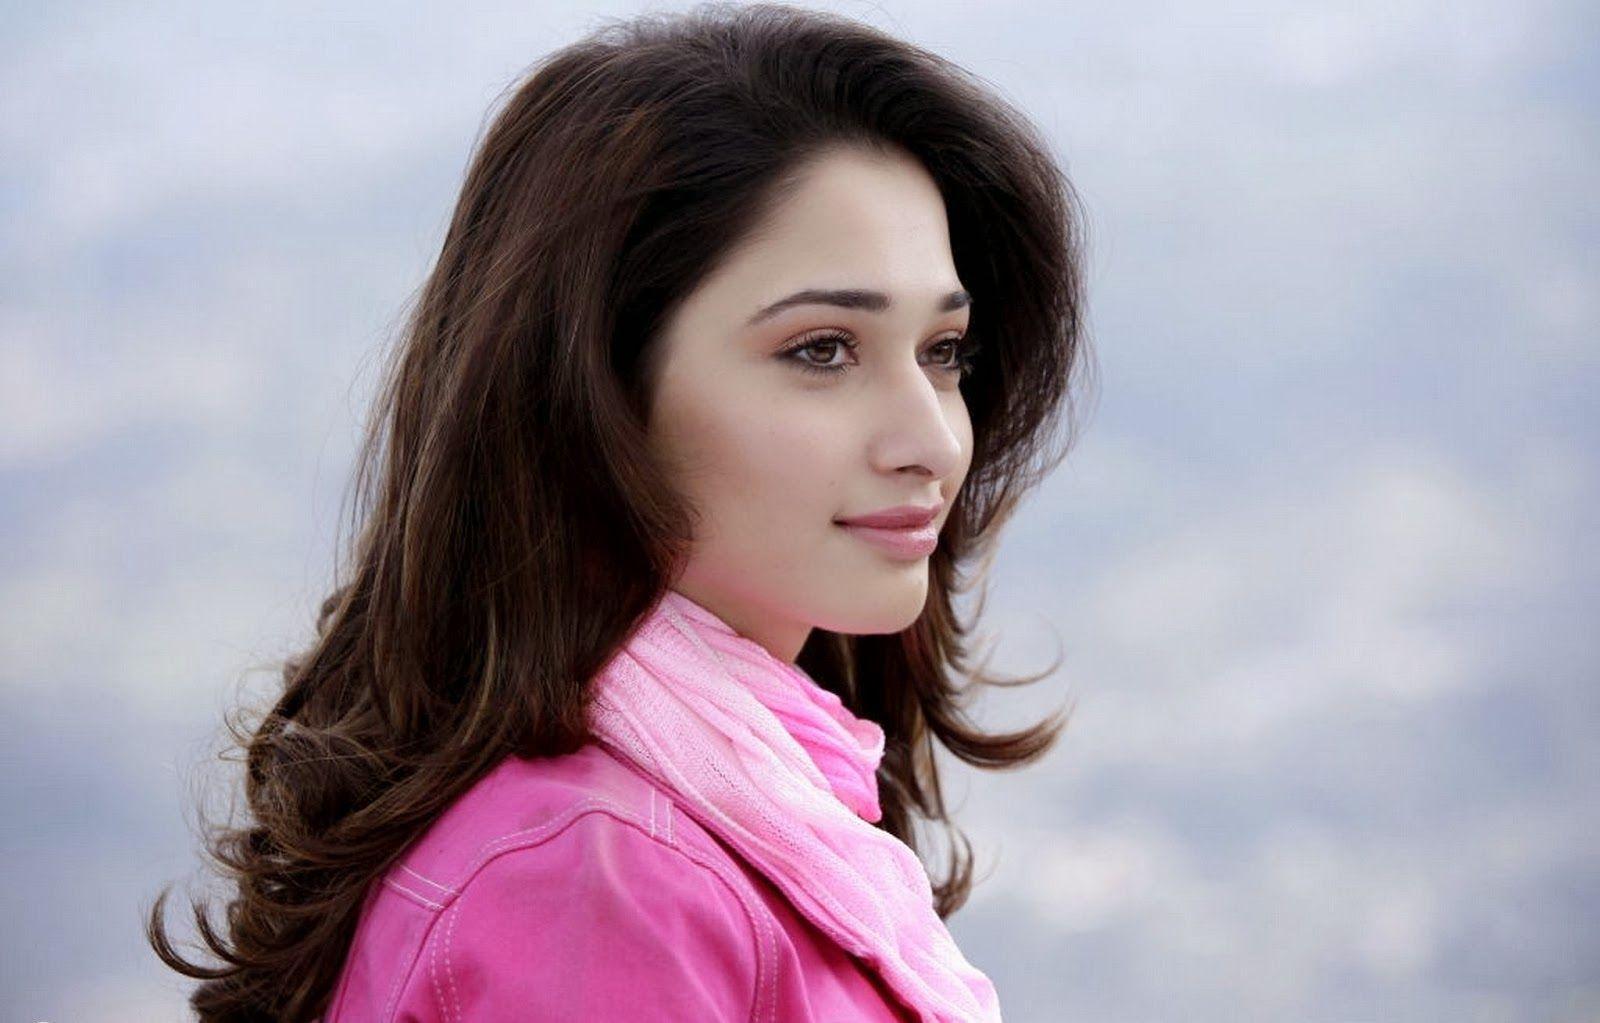 Photo for Tamanna: HD Wallpapers